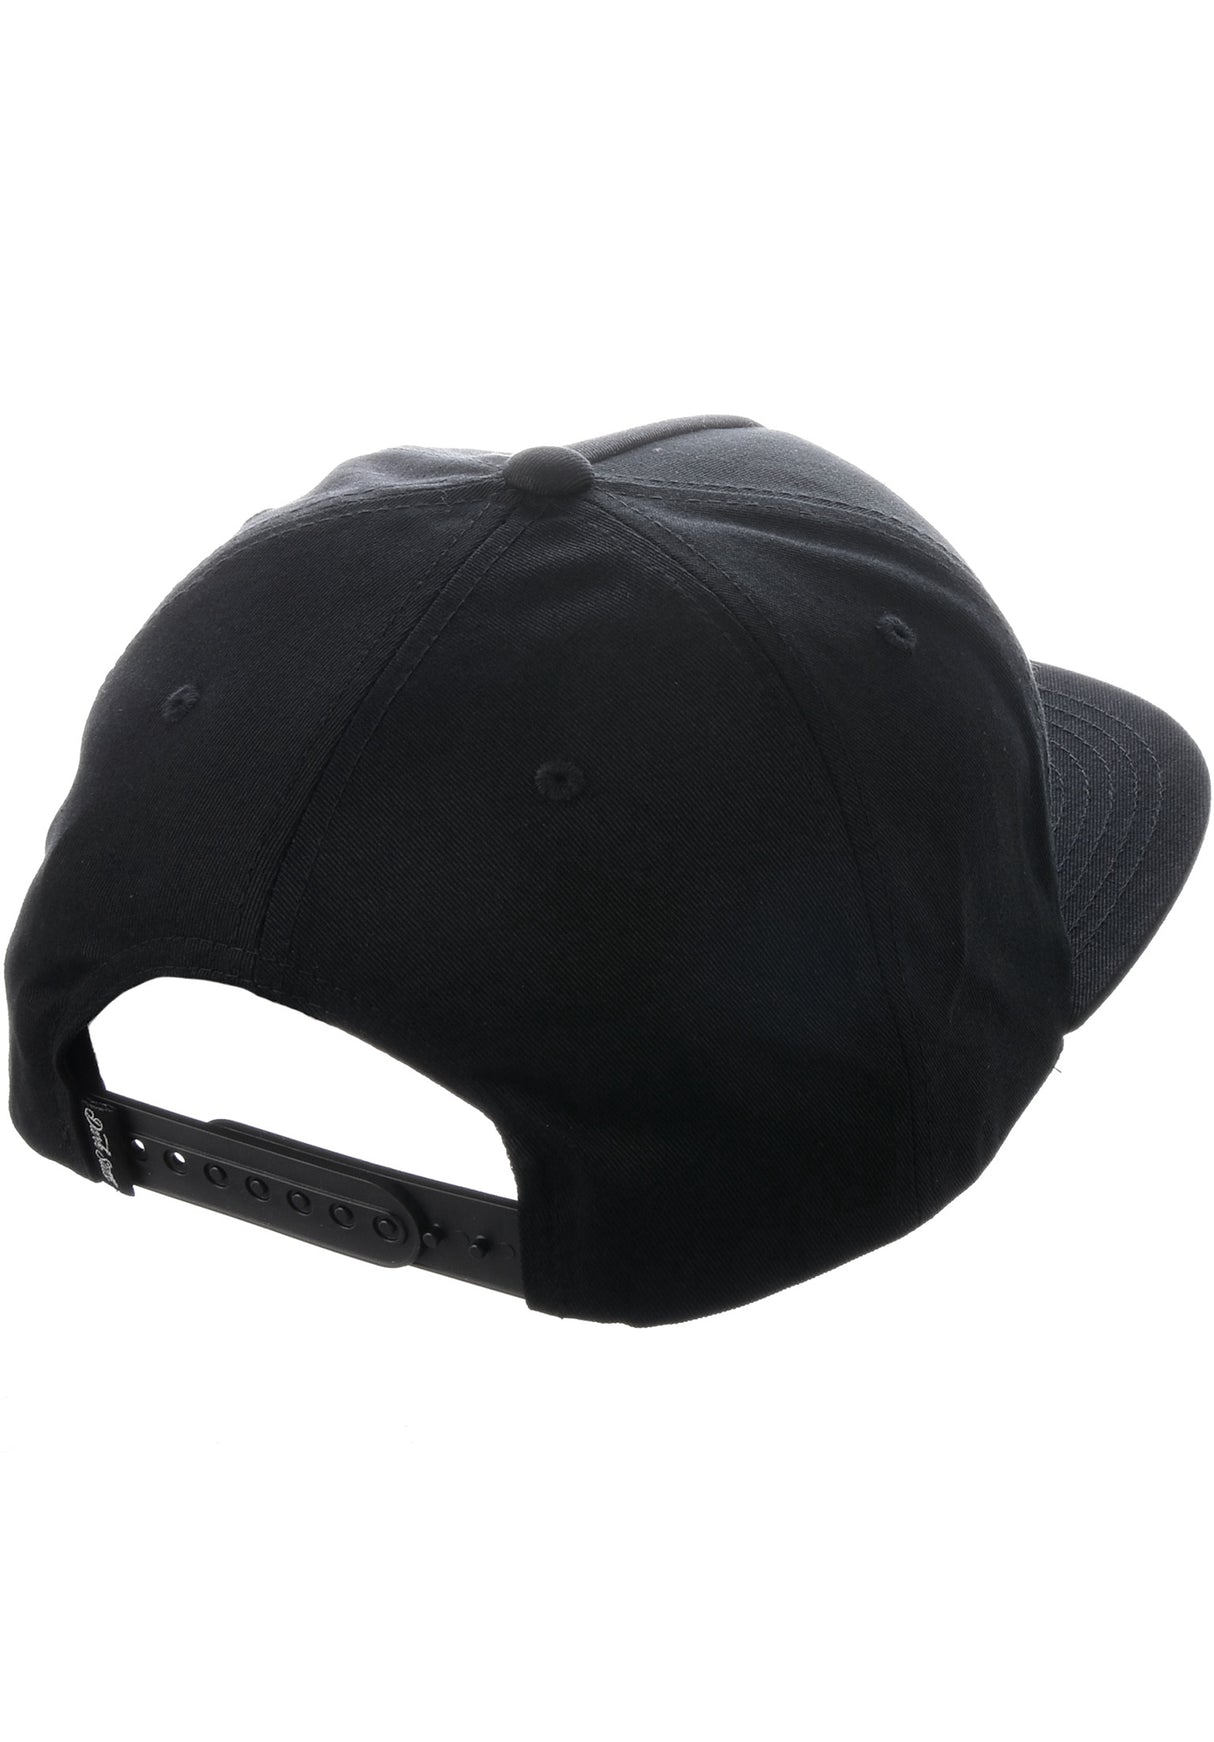 Tridents Snapback Unstructured black Close-Up1